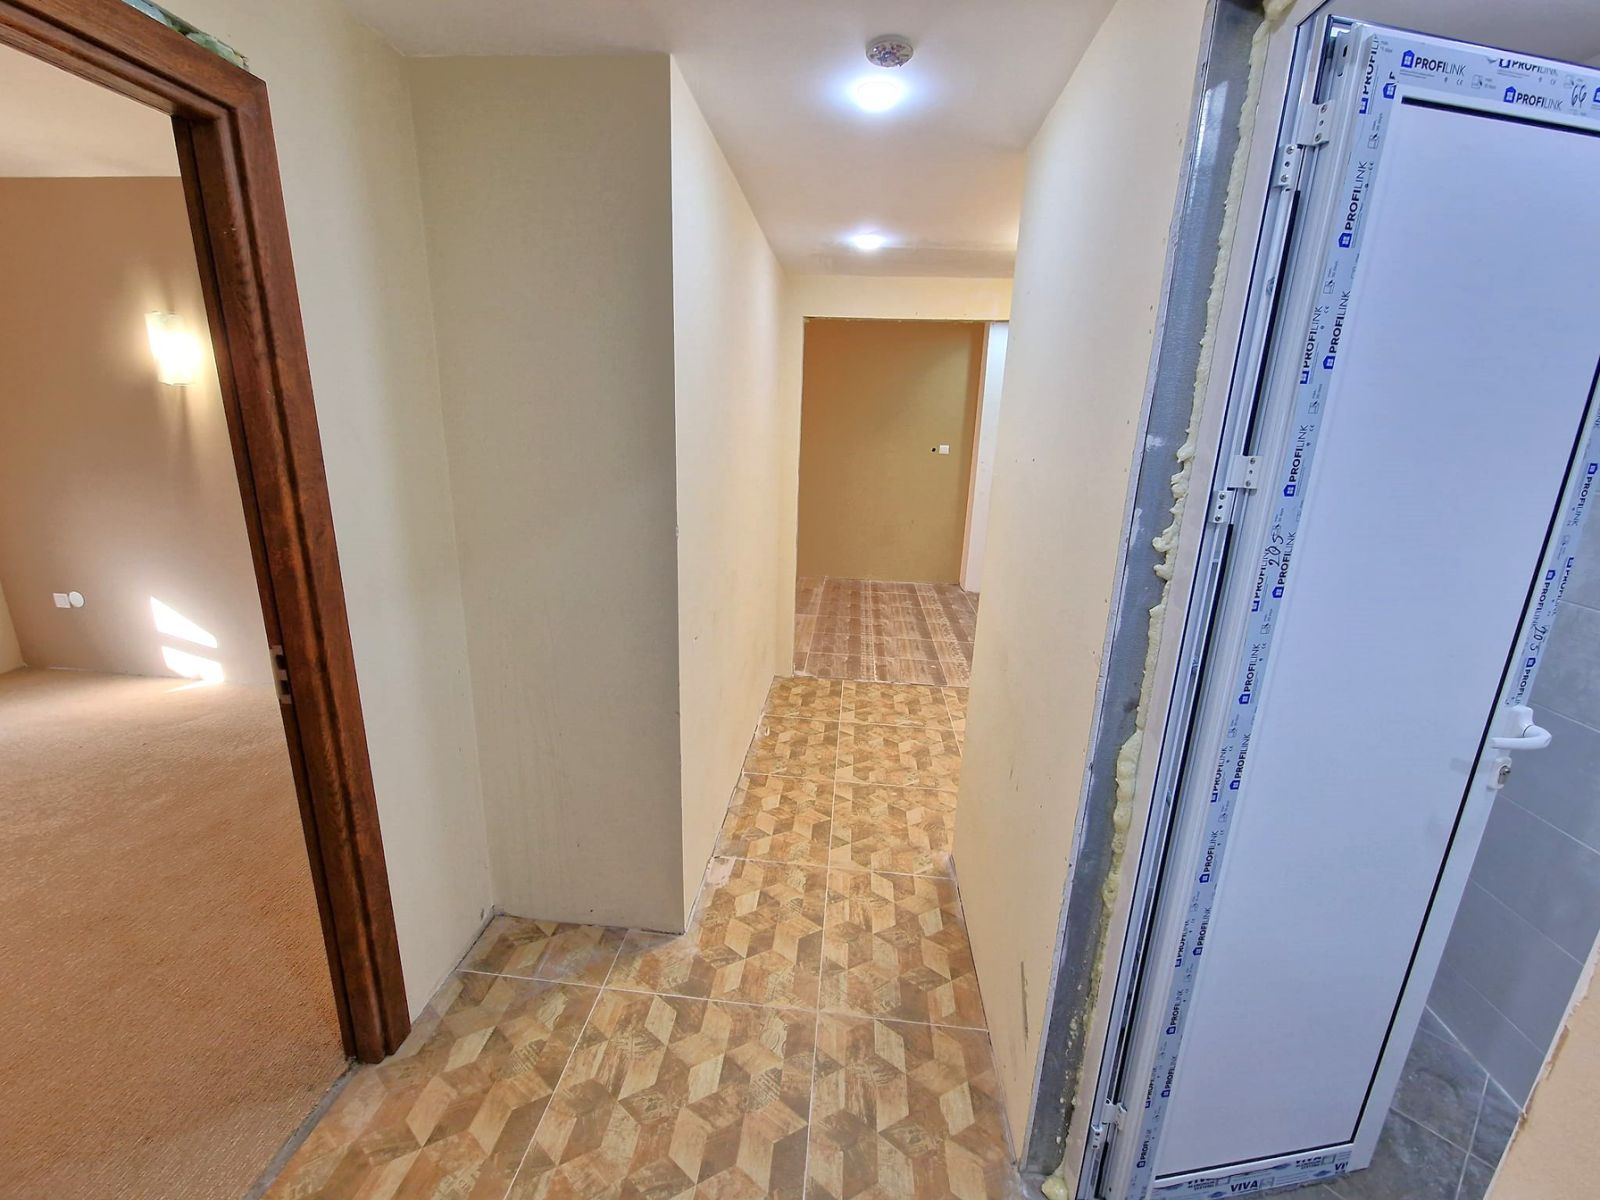 Bansko: Two bedroom apartment for sale in a residential building with a low maintenance fee